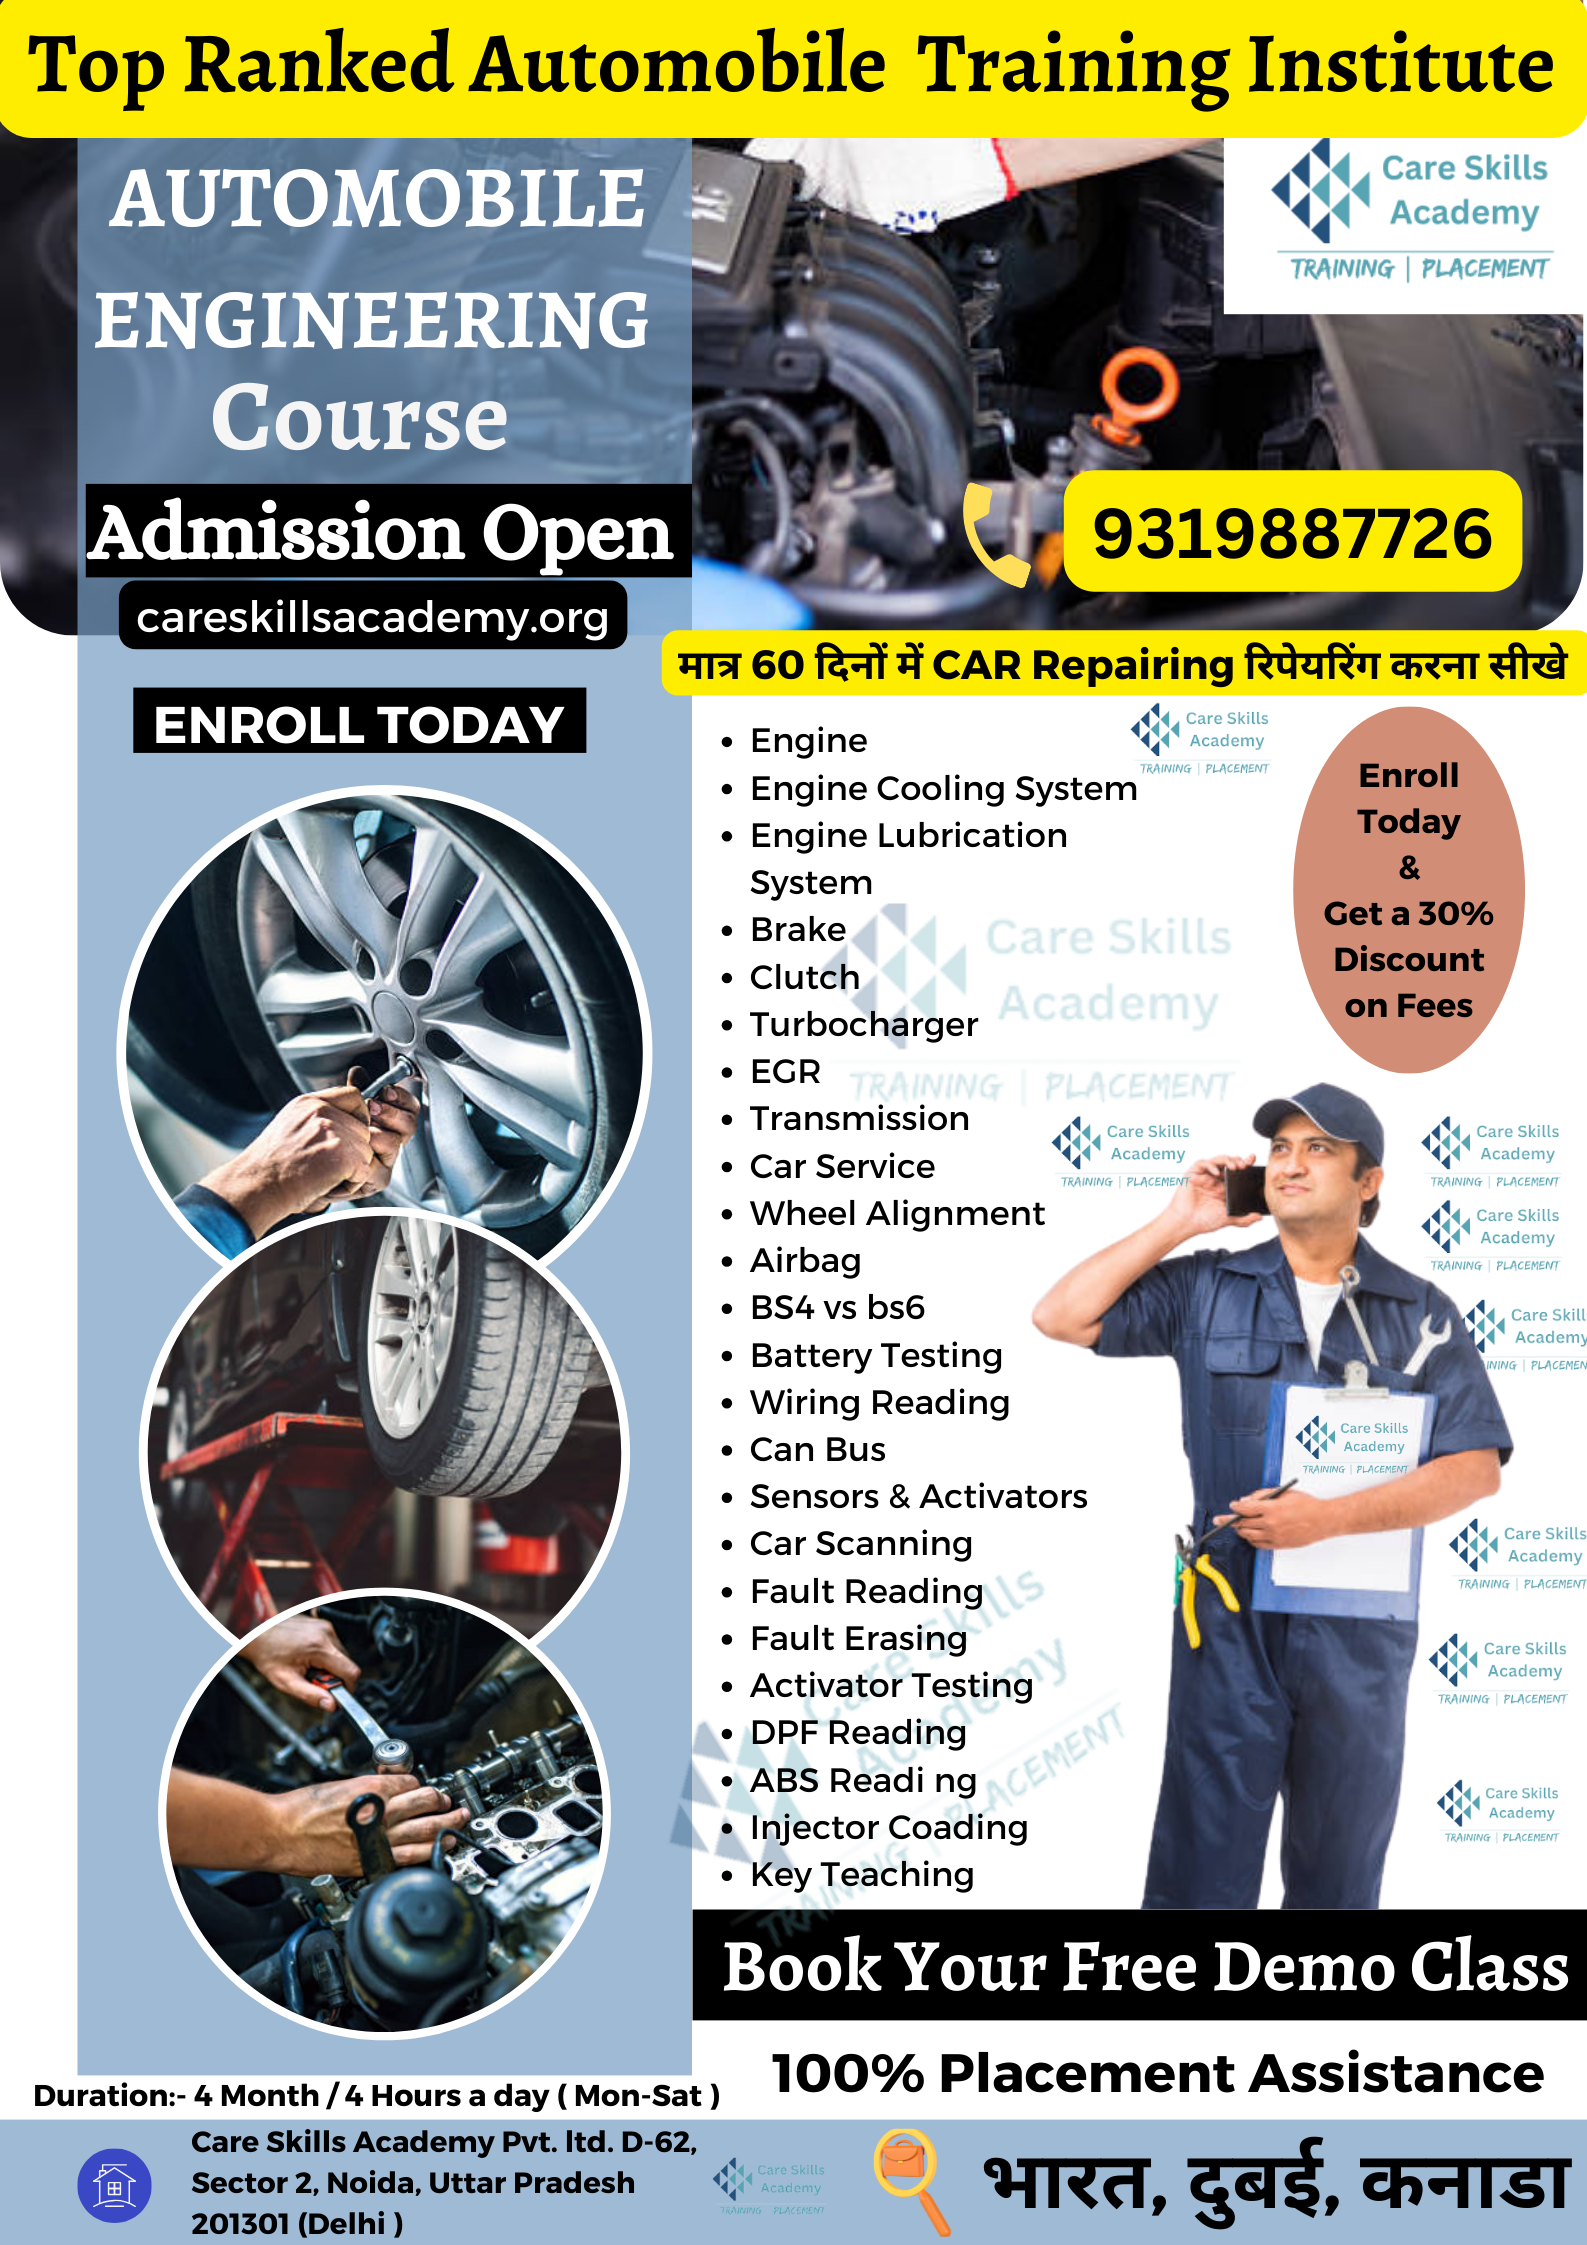 Why Choose Care Skills Academy for Automobile Engineering Course in Delhi